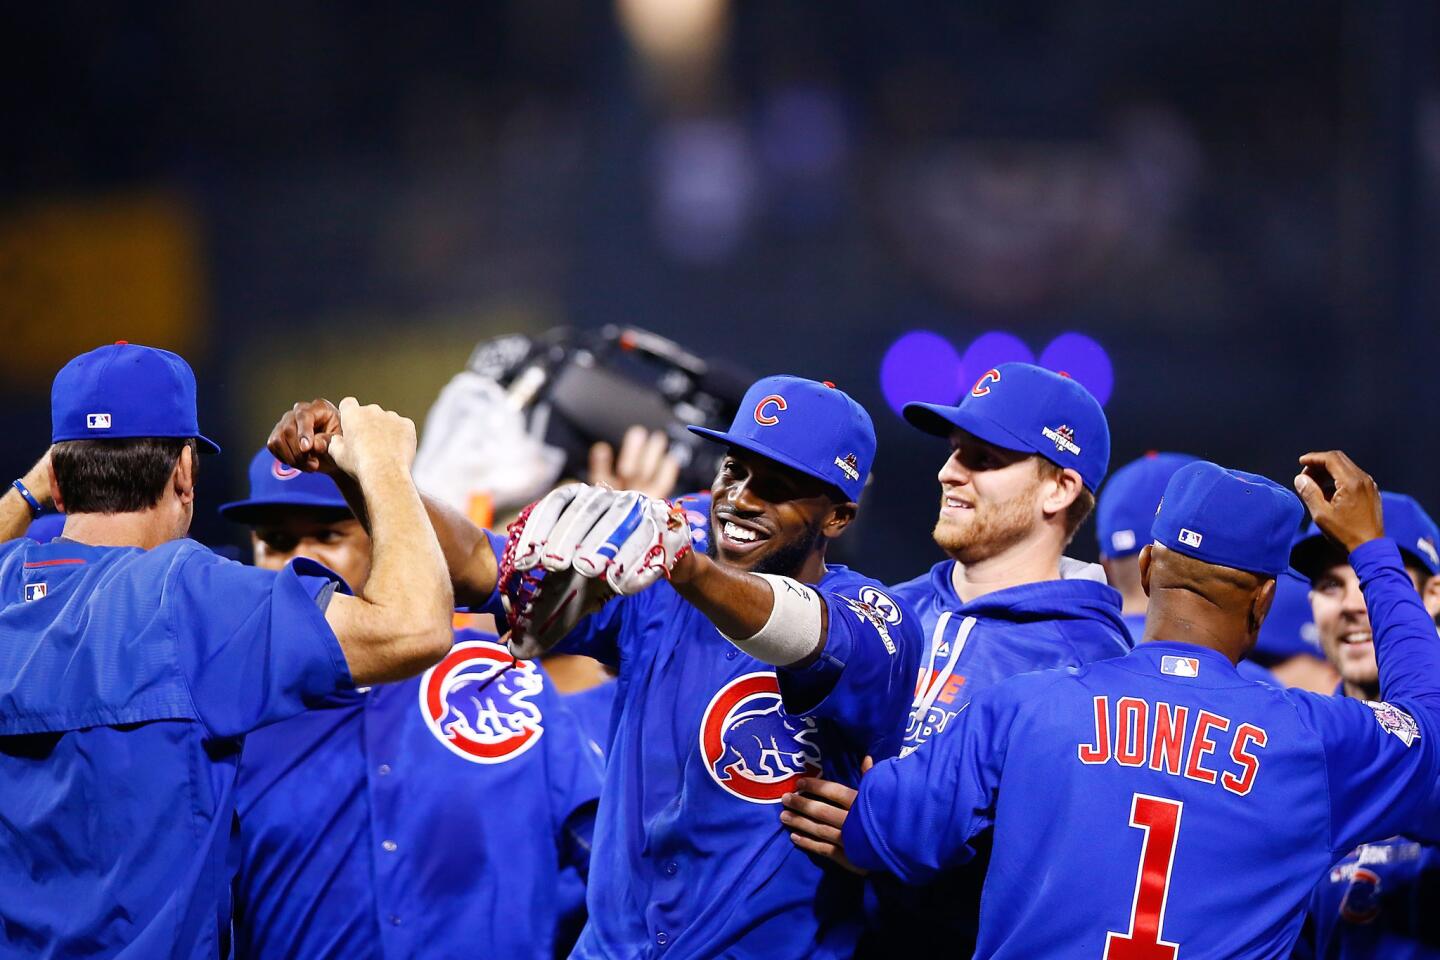 Wild Card Game - Chicago Cubs v Pittsburgh Pirates